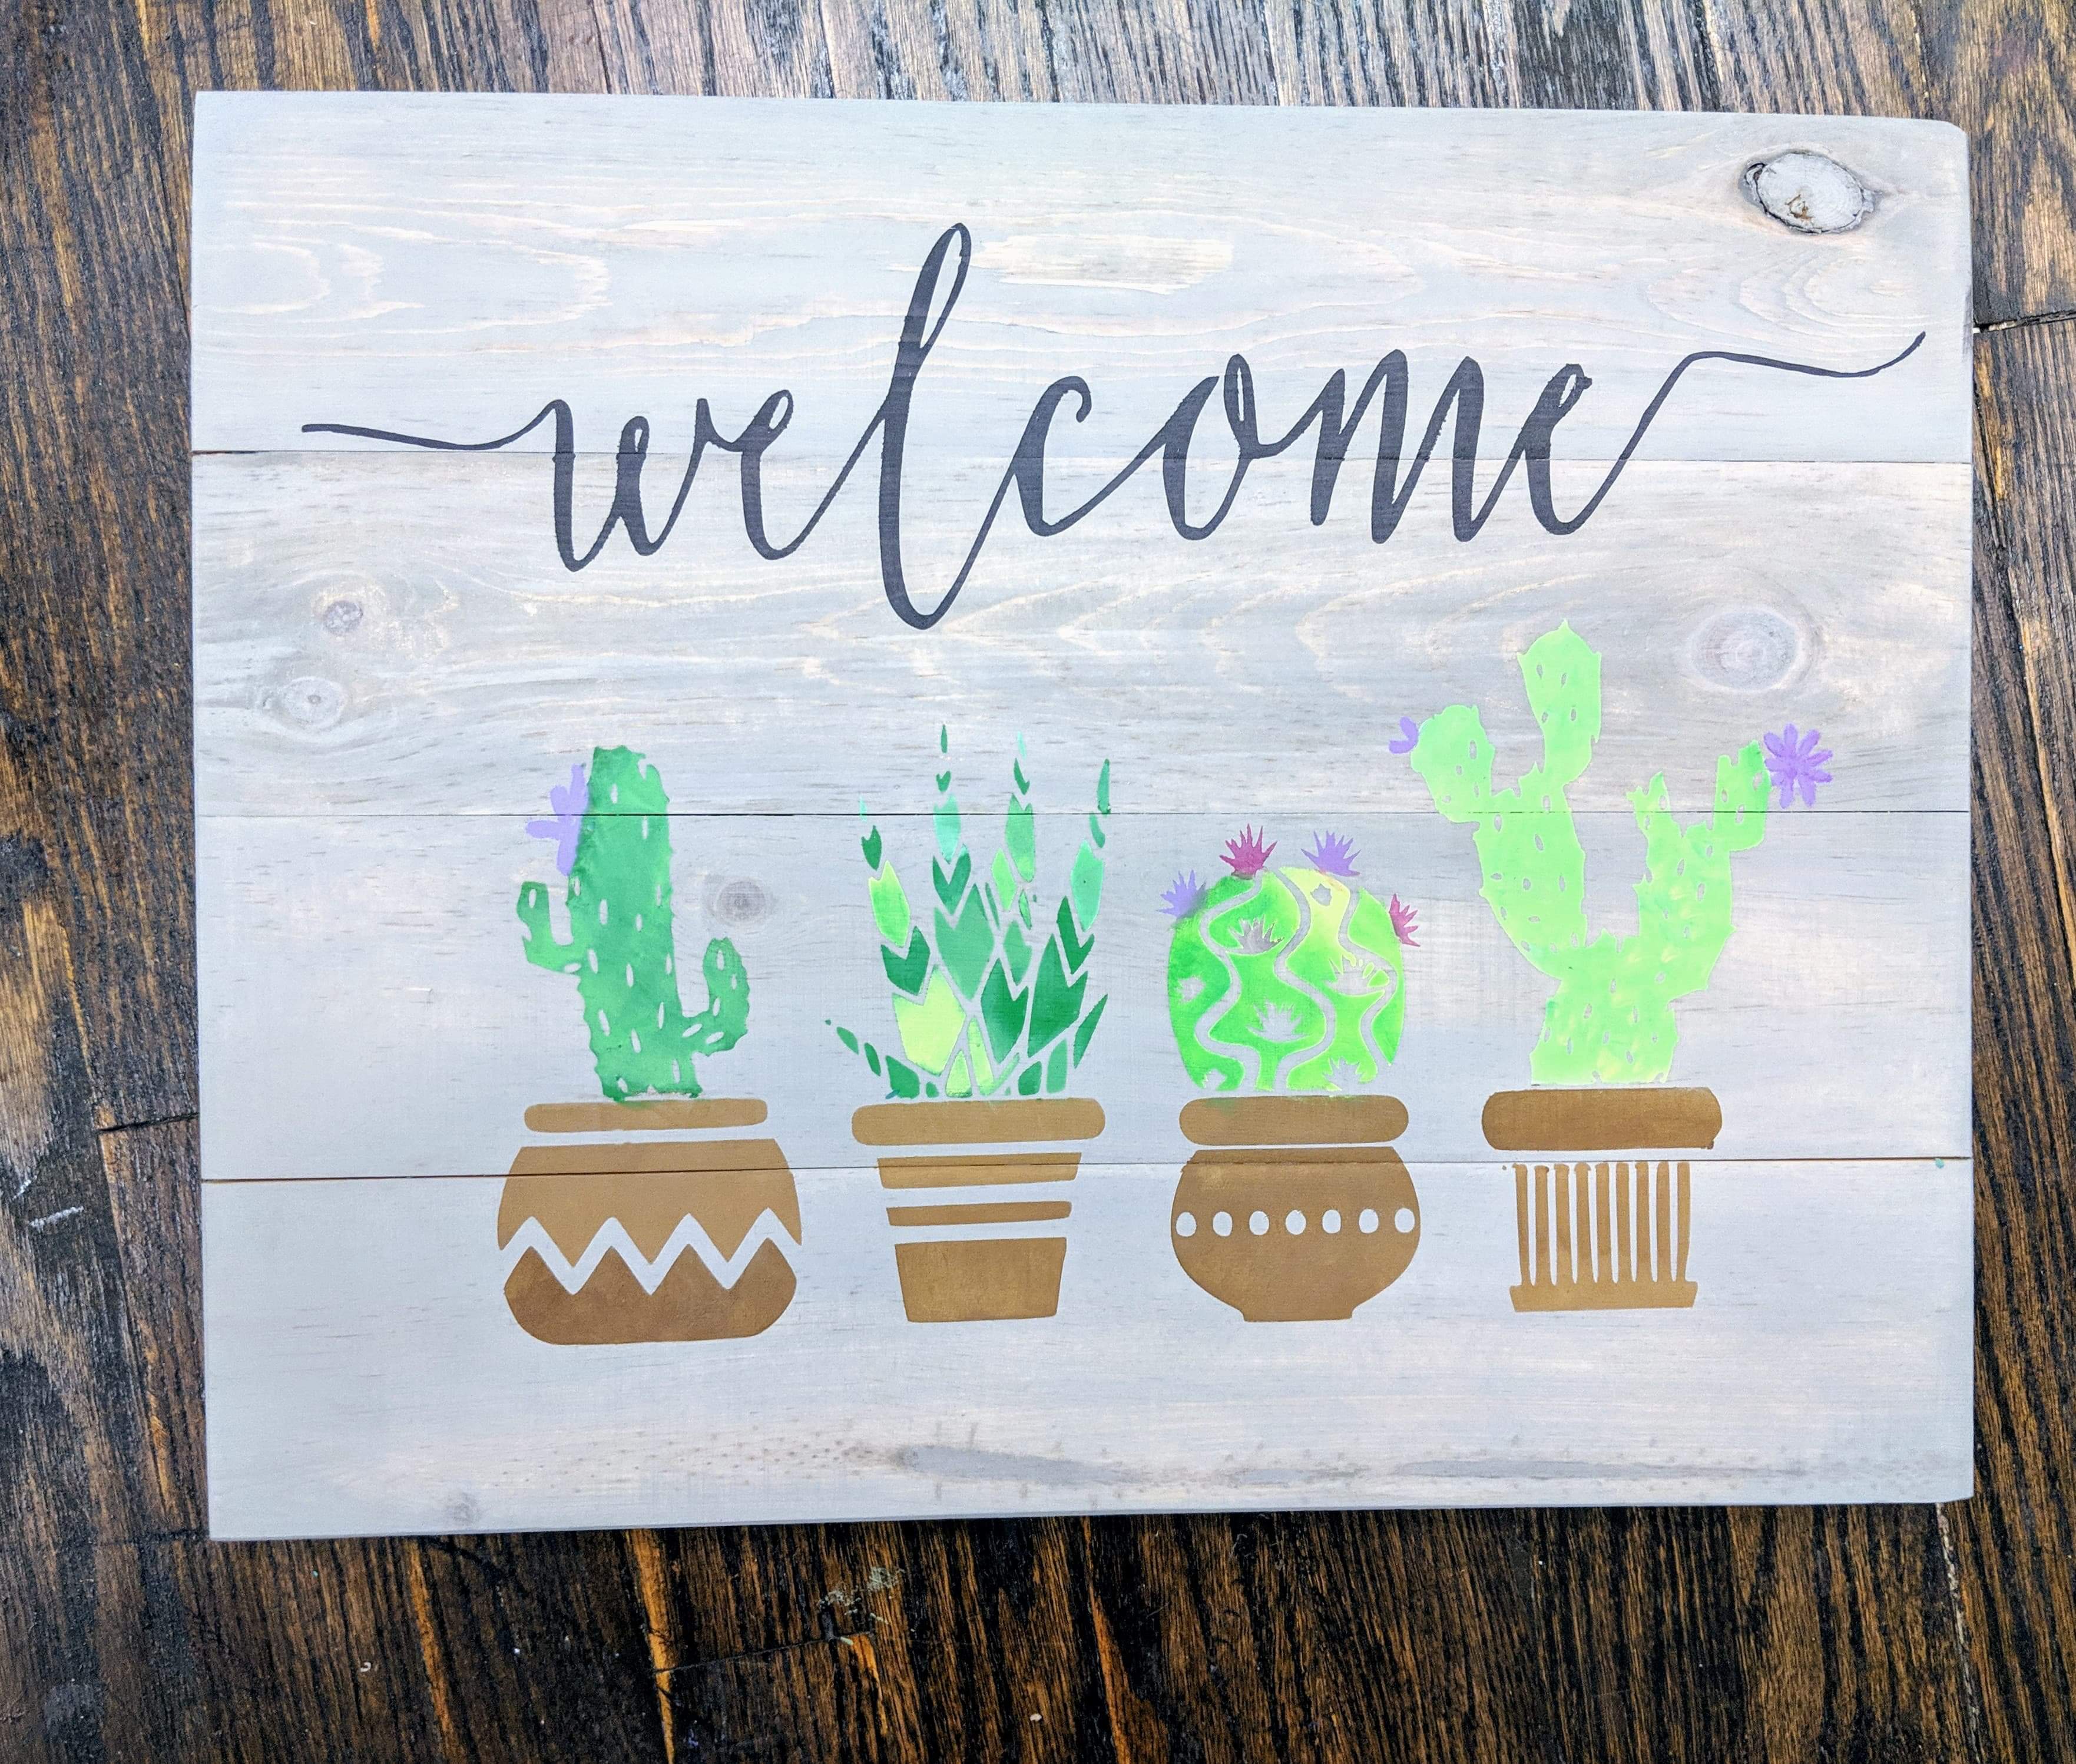 Welcome with cactus